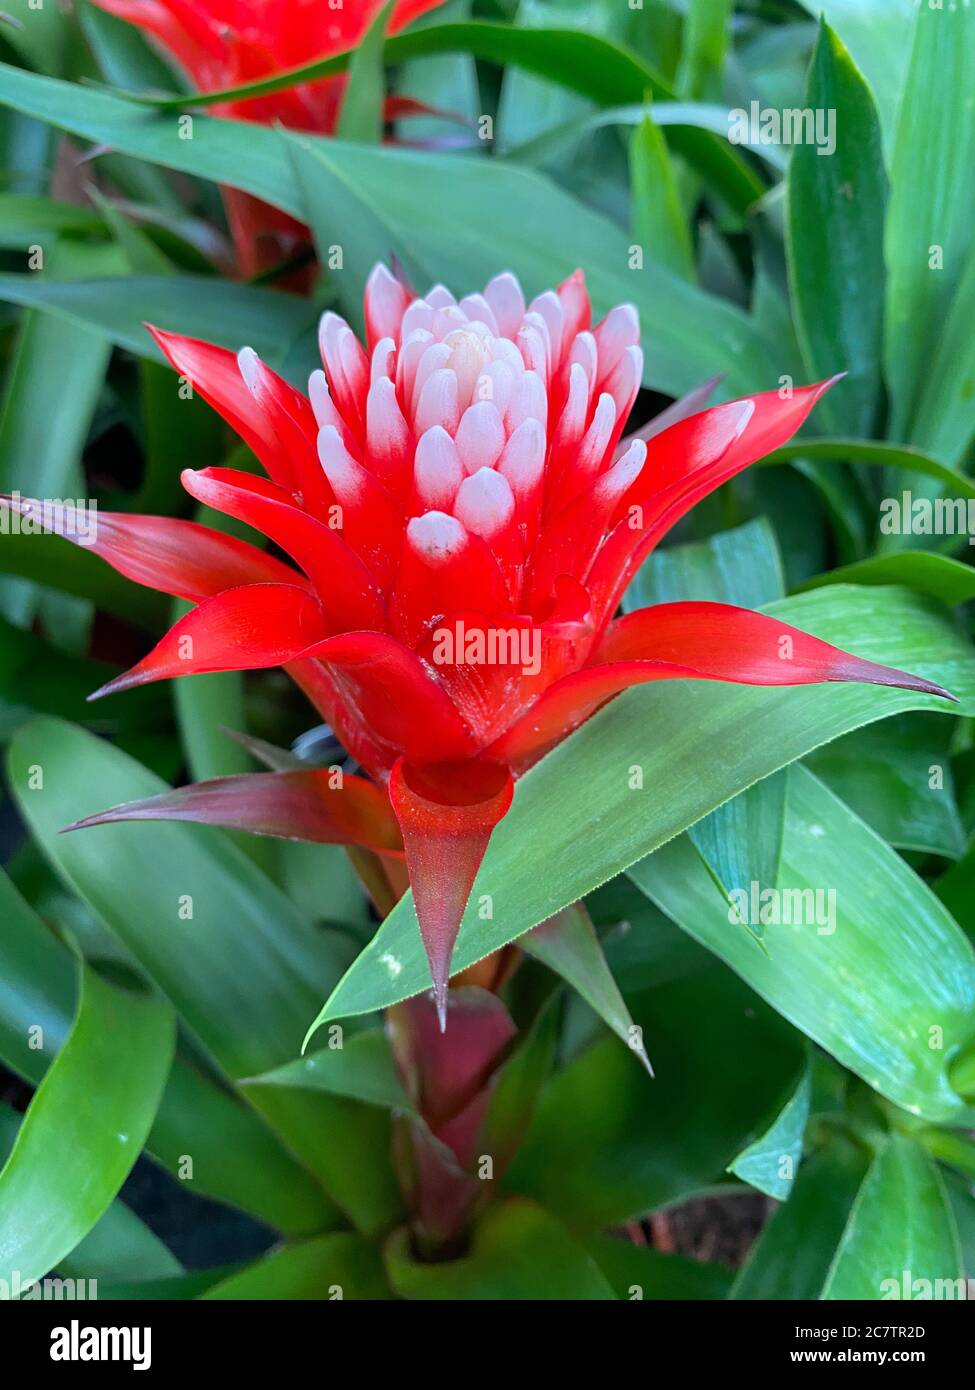 Top view closeup of isolated beautiful red and white flower head (bromelia guzmania desautelsii) with green leaves background Stock Photo